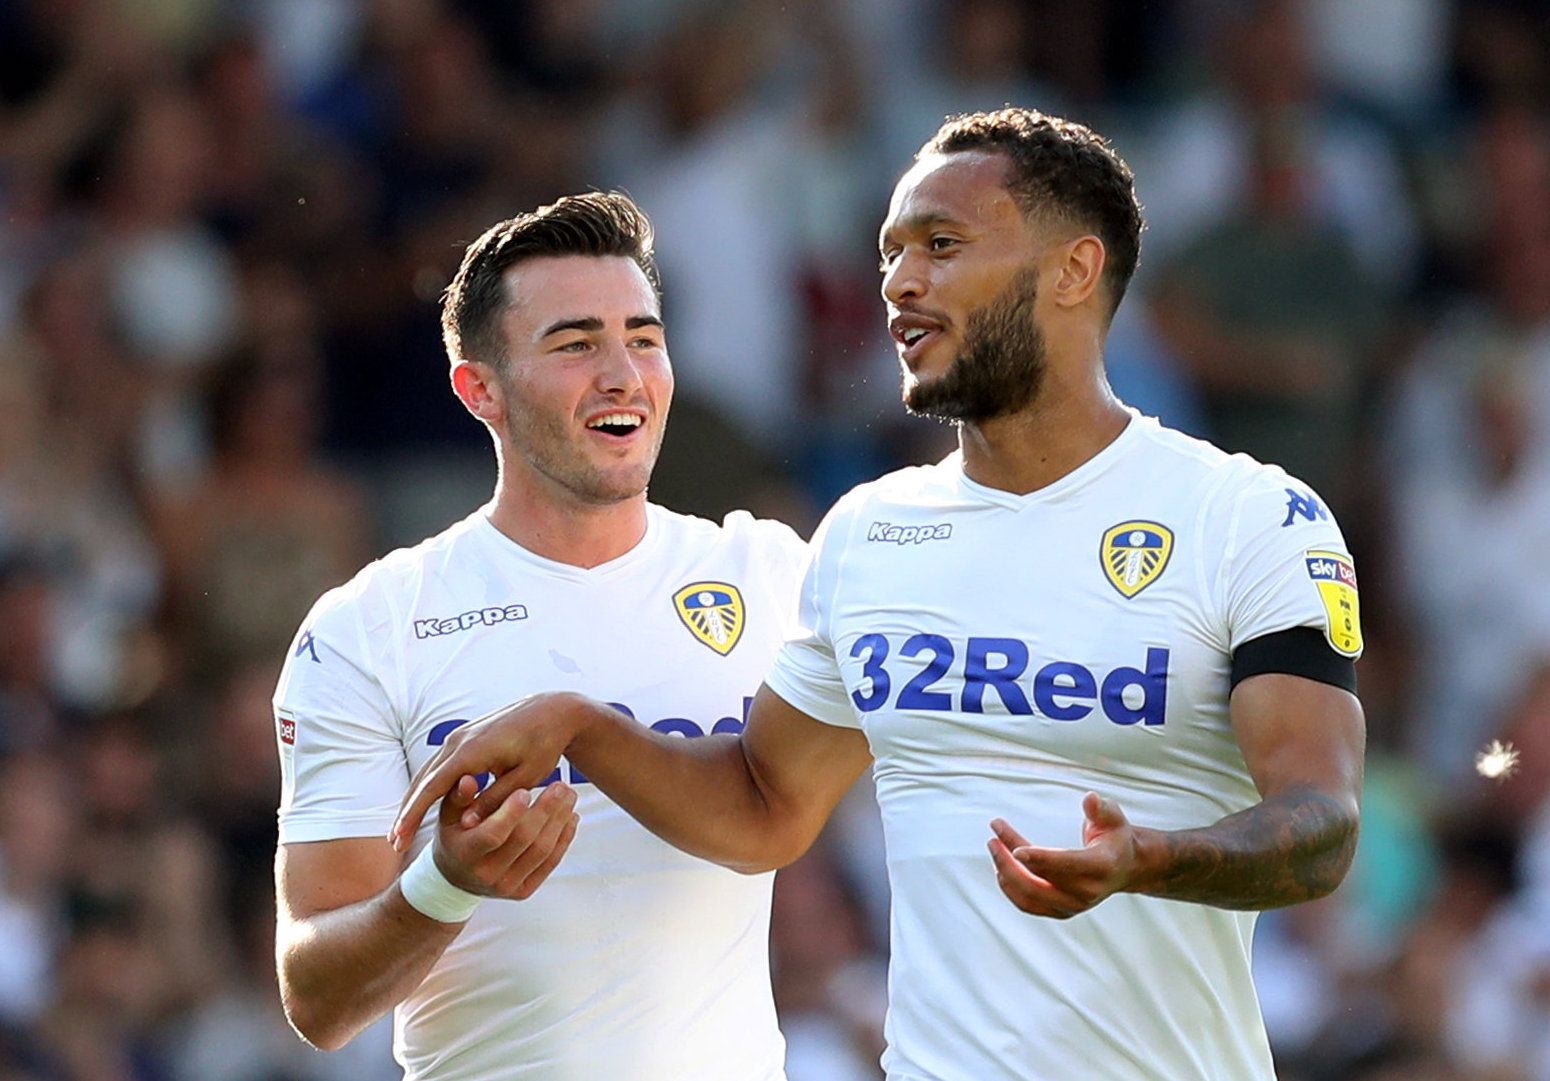 Soccer Football - Championship - Leeds United v Stoke City - Elland Road, Leeds, Britain - August 5, 2018   Leeds United's Jack Harrison and Lewis Baker celebrate at the end of the game   Action Images/John Clifton    EDITORIAL USE ONLY. No use with unauthorized audio, video, data, fixture lists, club/league logos or "live" services. Online in-match use limited to 75 images, no video emulation. No use in betting, games or single club/league/player publications. Please contact your account repres